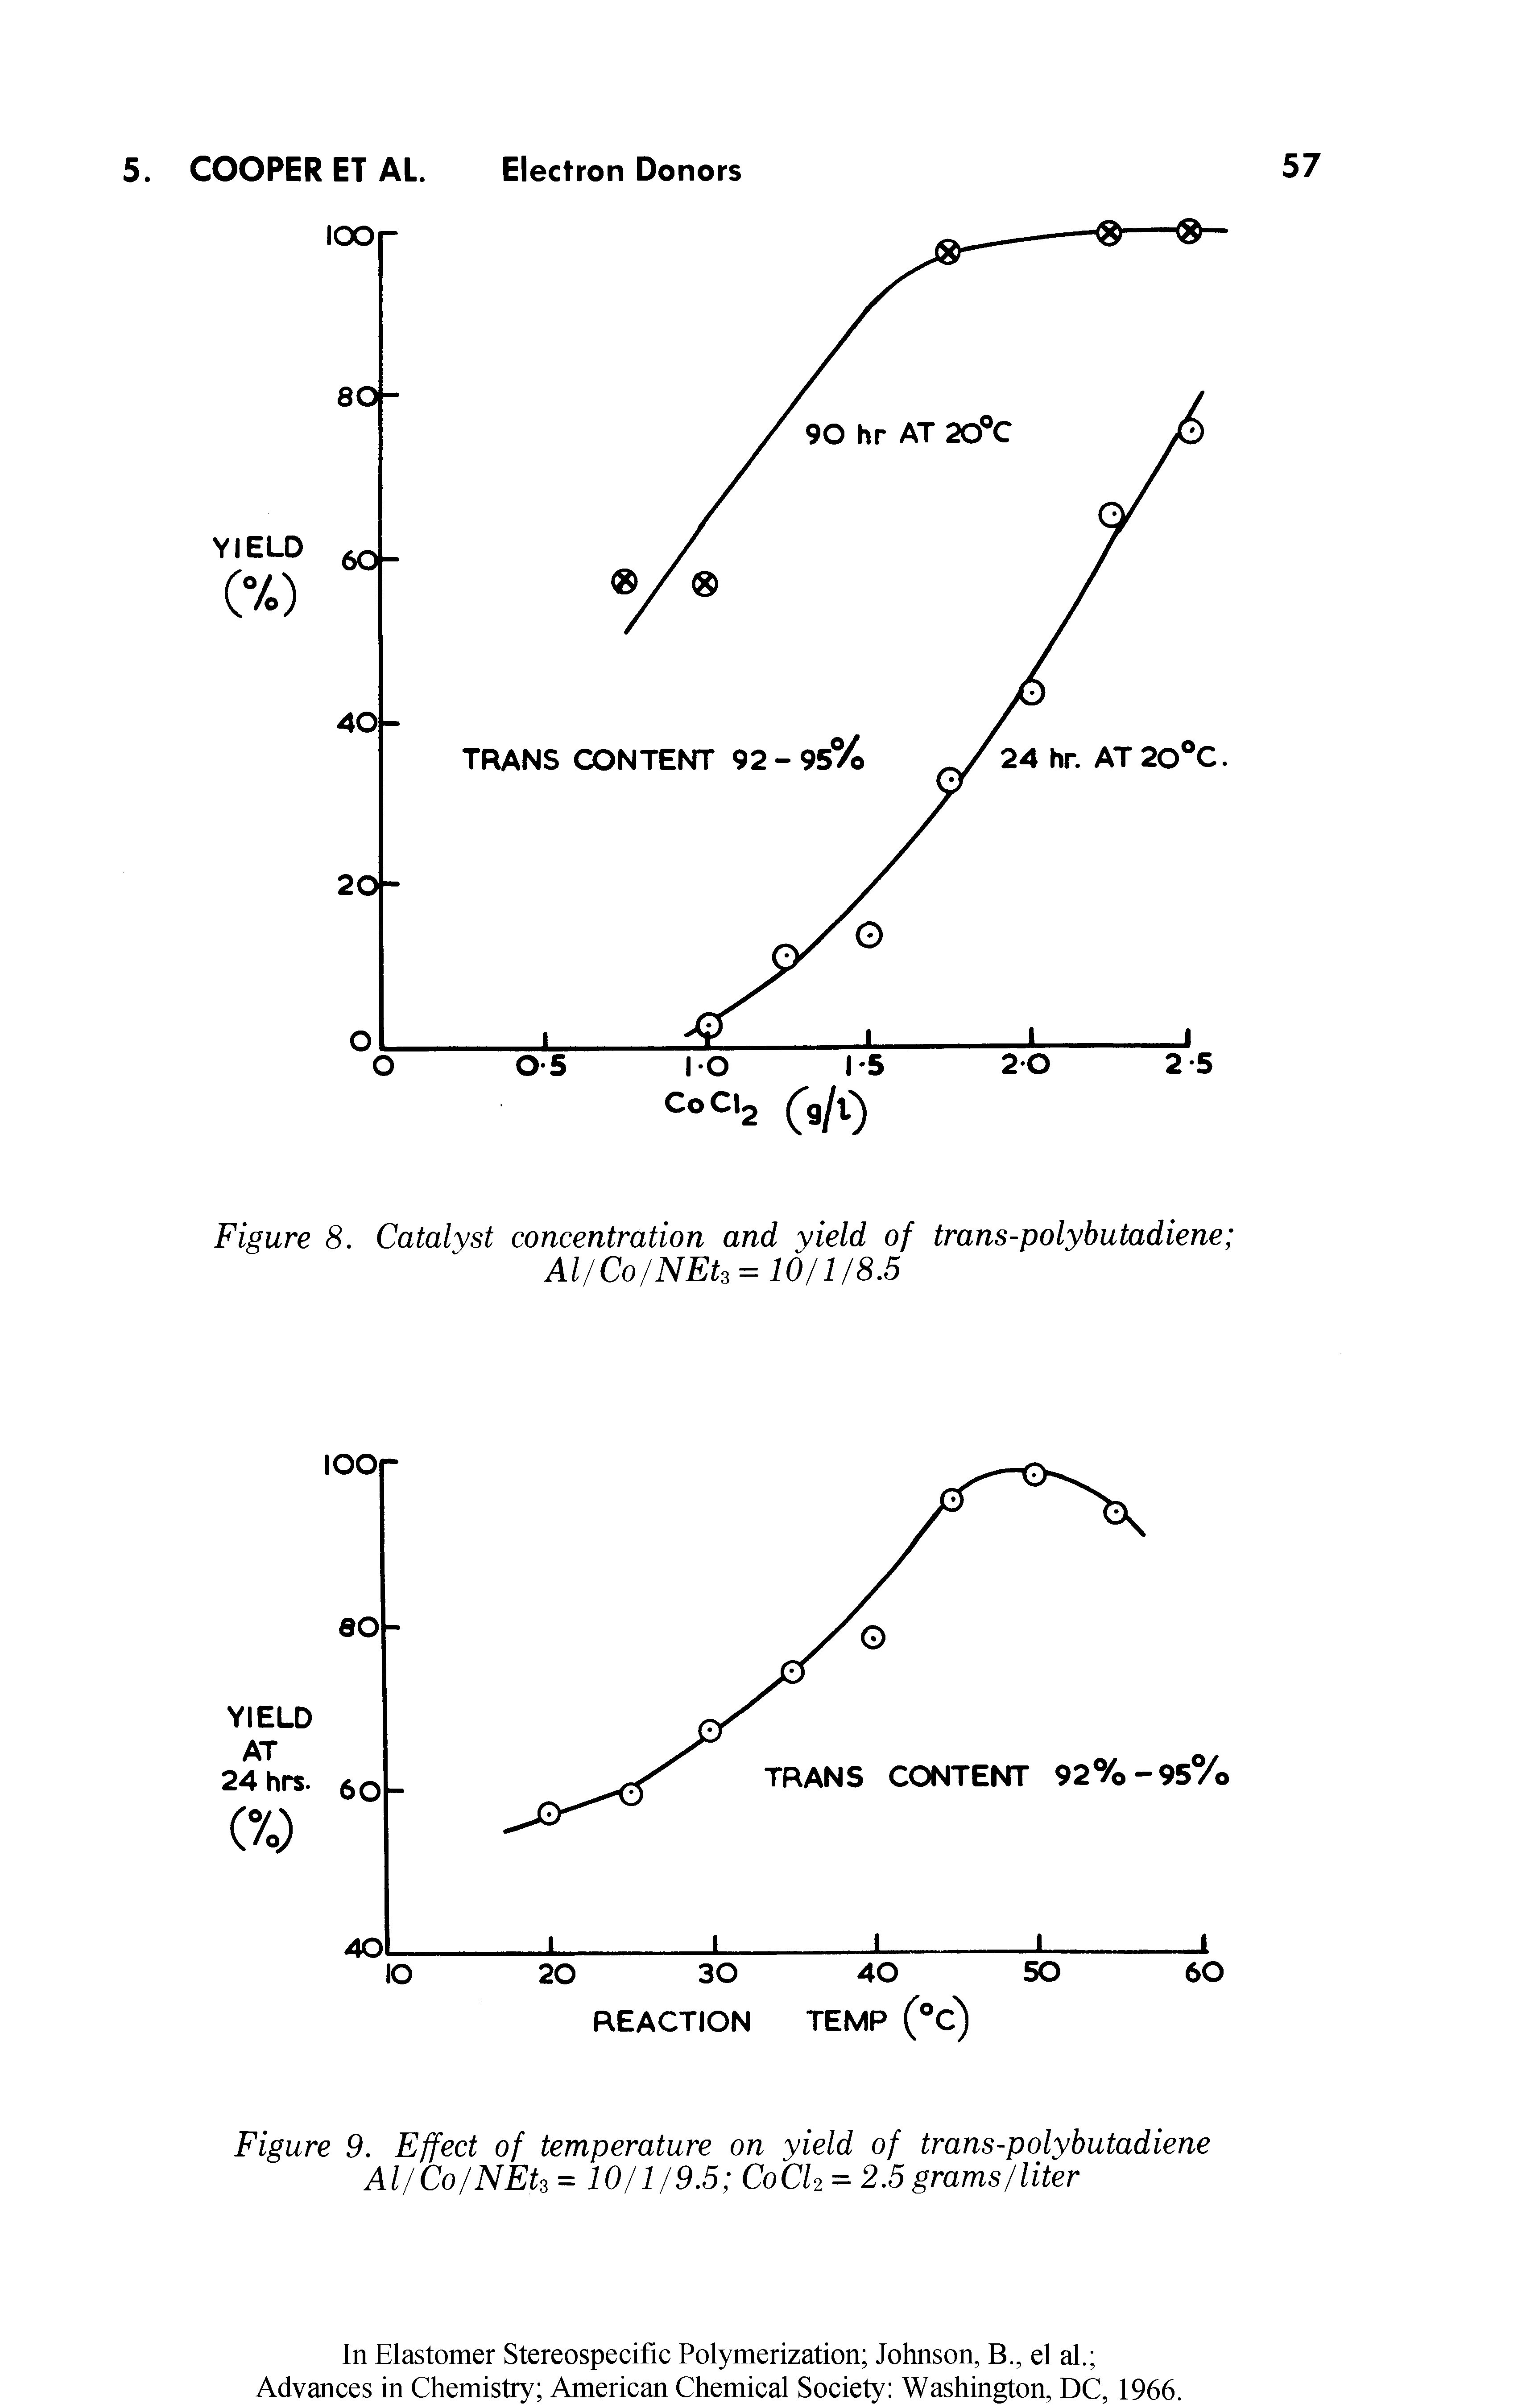 Figure 8. Catalyst concentration and yield of trans-polybutadiene Al/Co/NEh = 10/1/8.5...